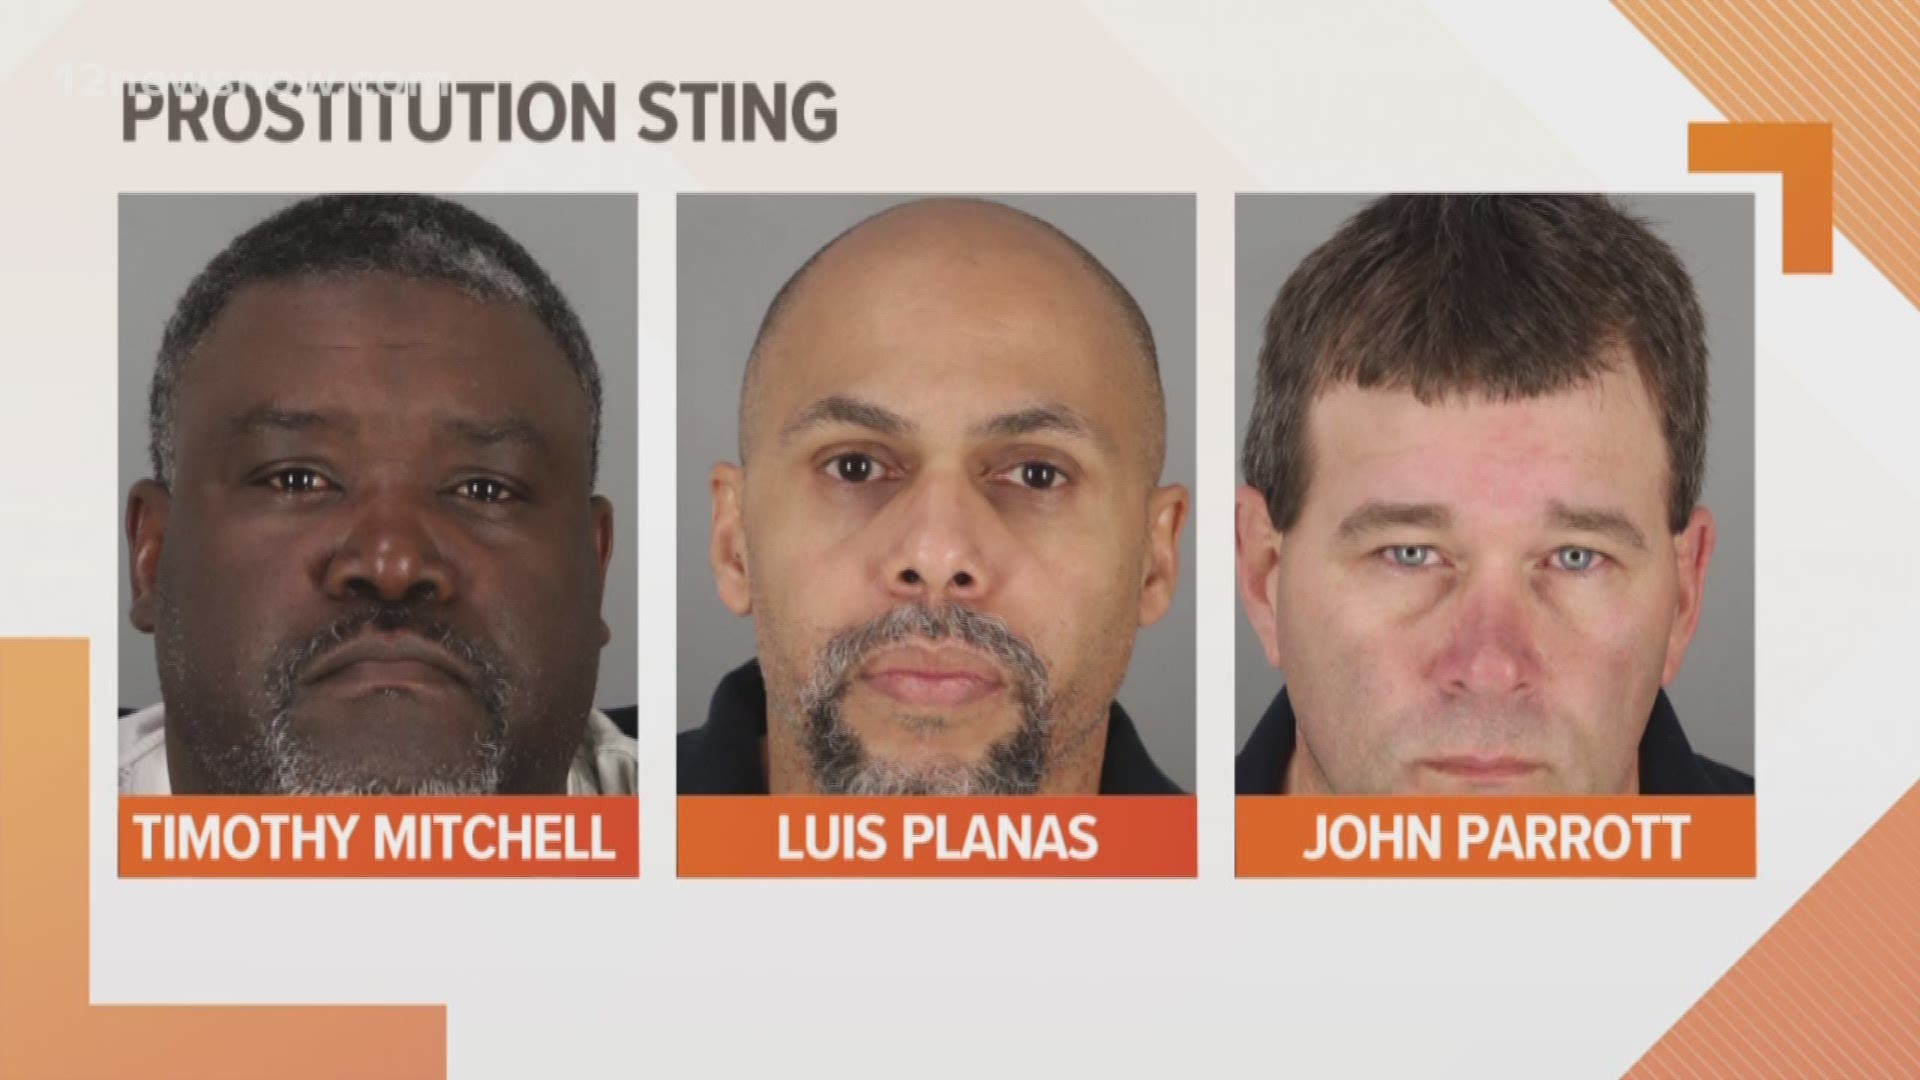 Beaumont police busted six men who responded to a prostitution ad online. They are all charged with prostitution, according to police.